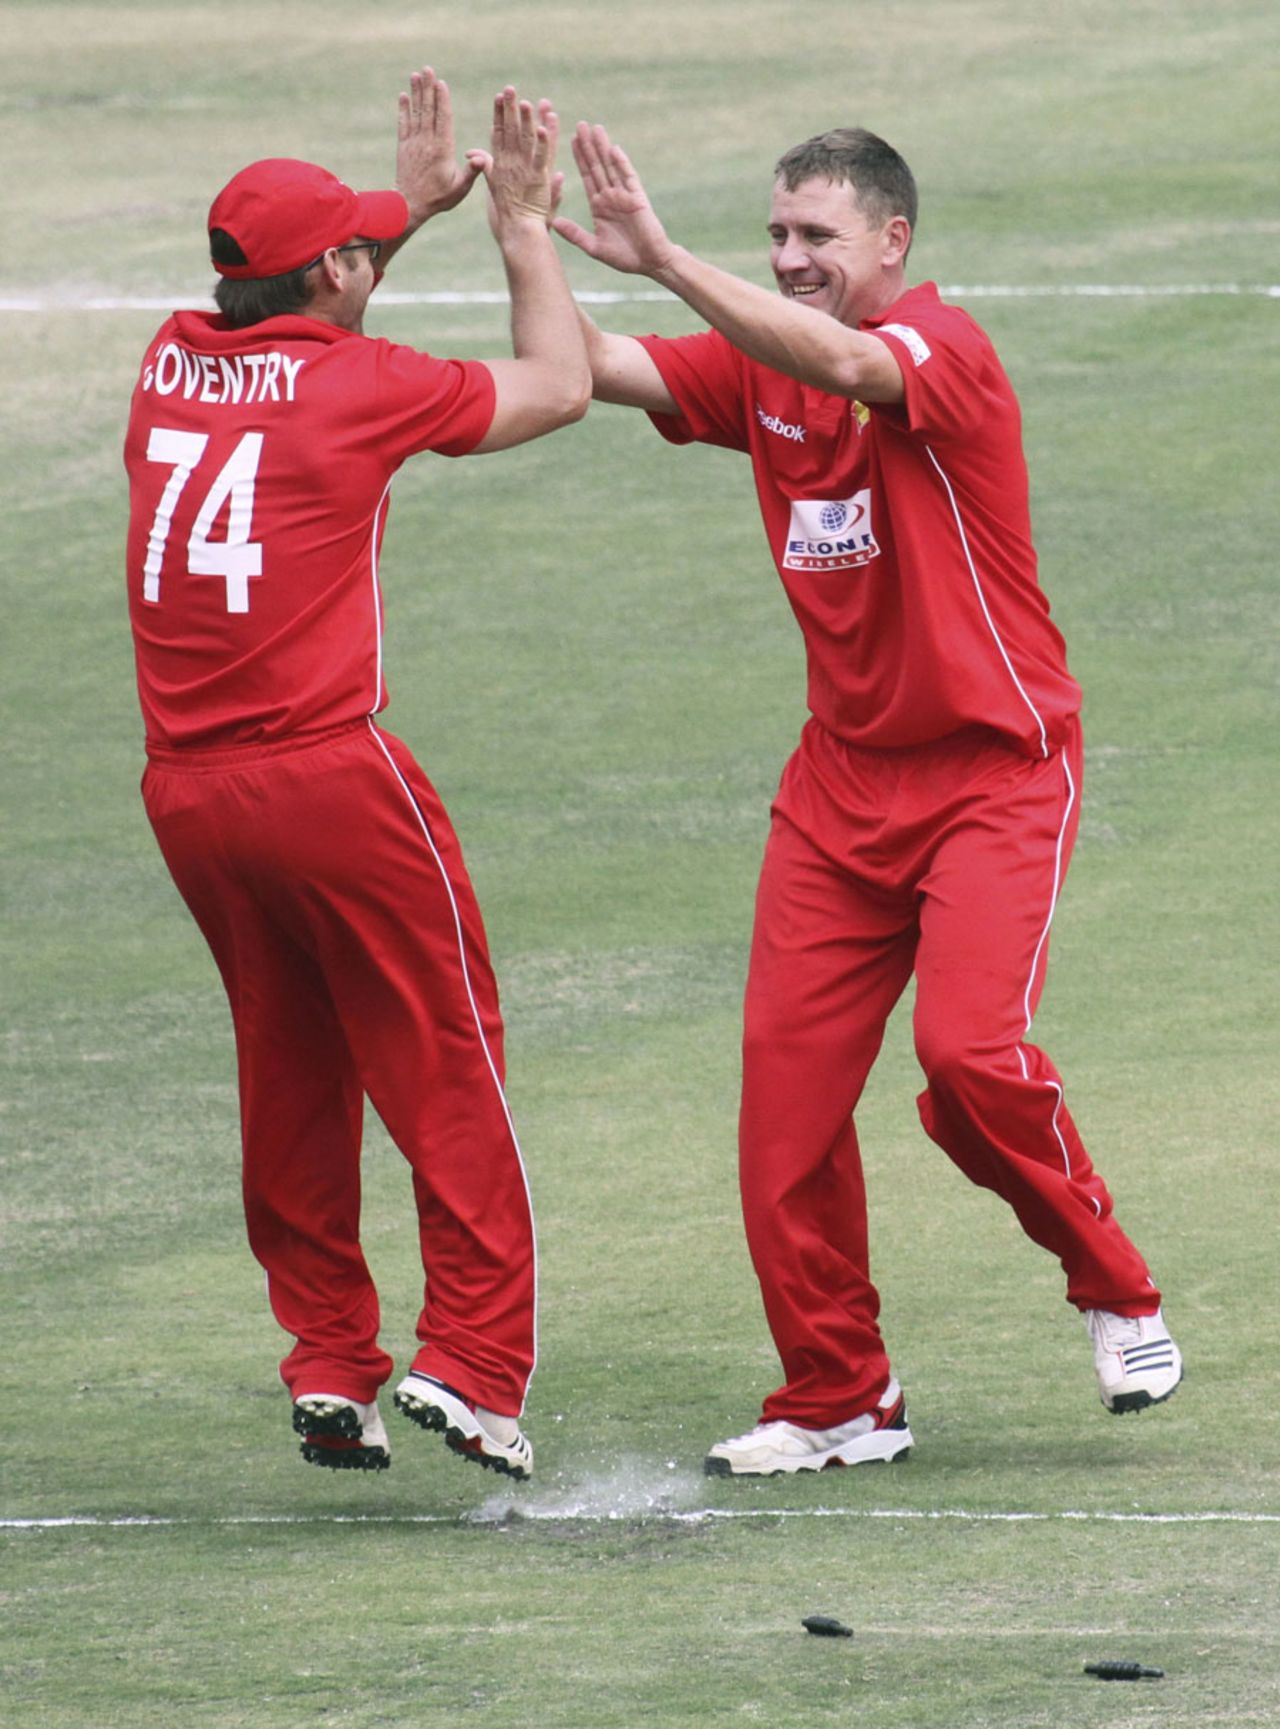 Charles Coventry gets a high five after running out Asad Shafiq, Zimbabwe v Pakistan, 1st Twenty20, Harare, September 16, 2011